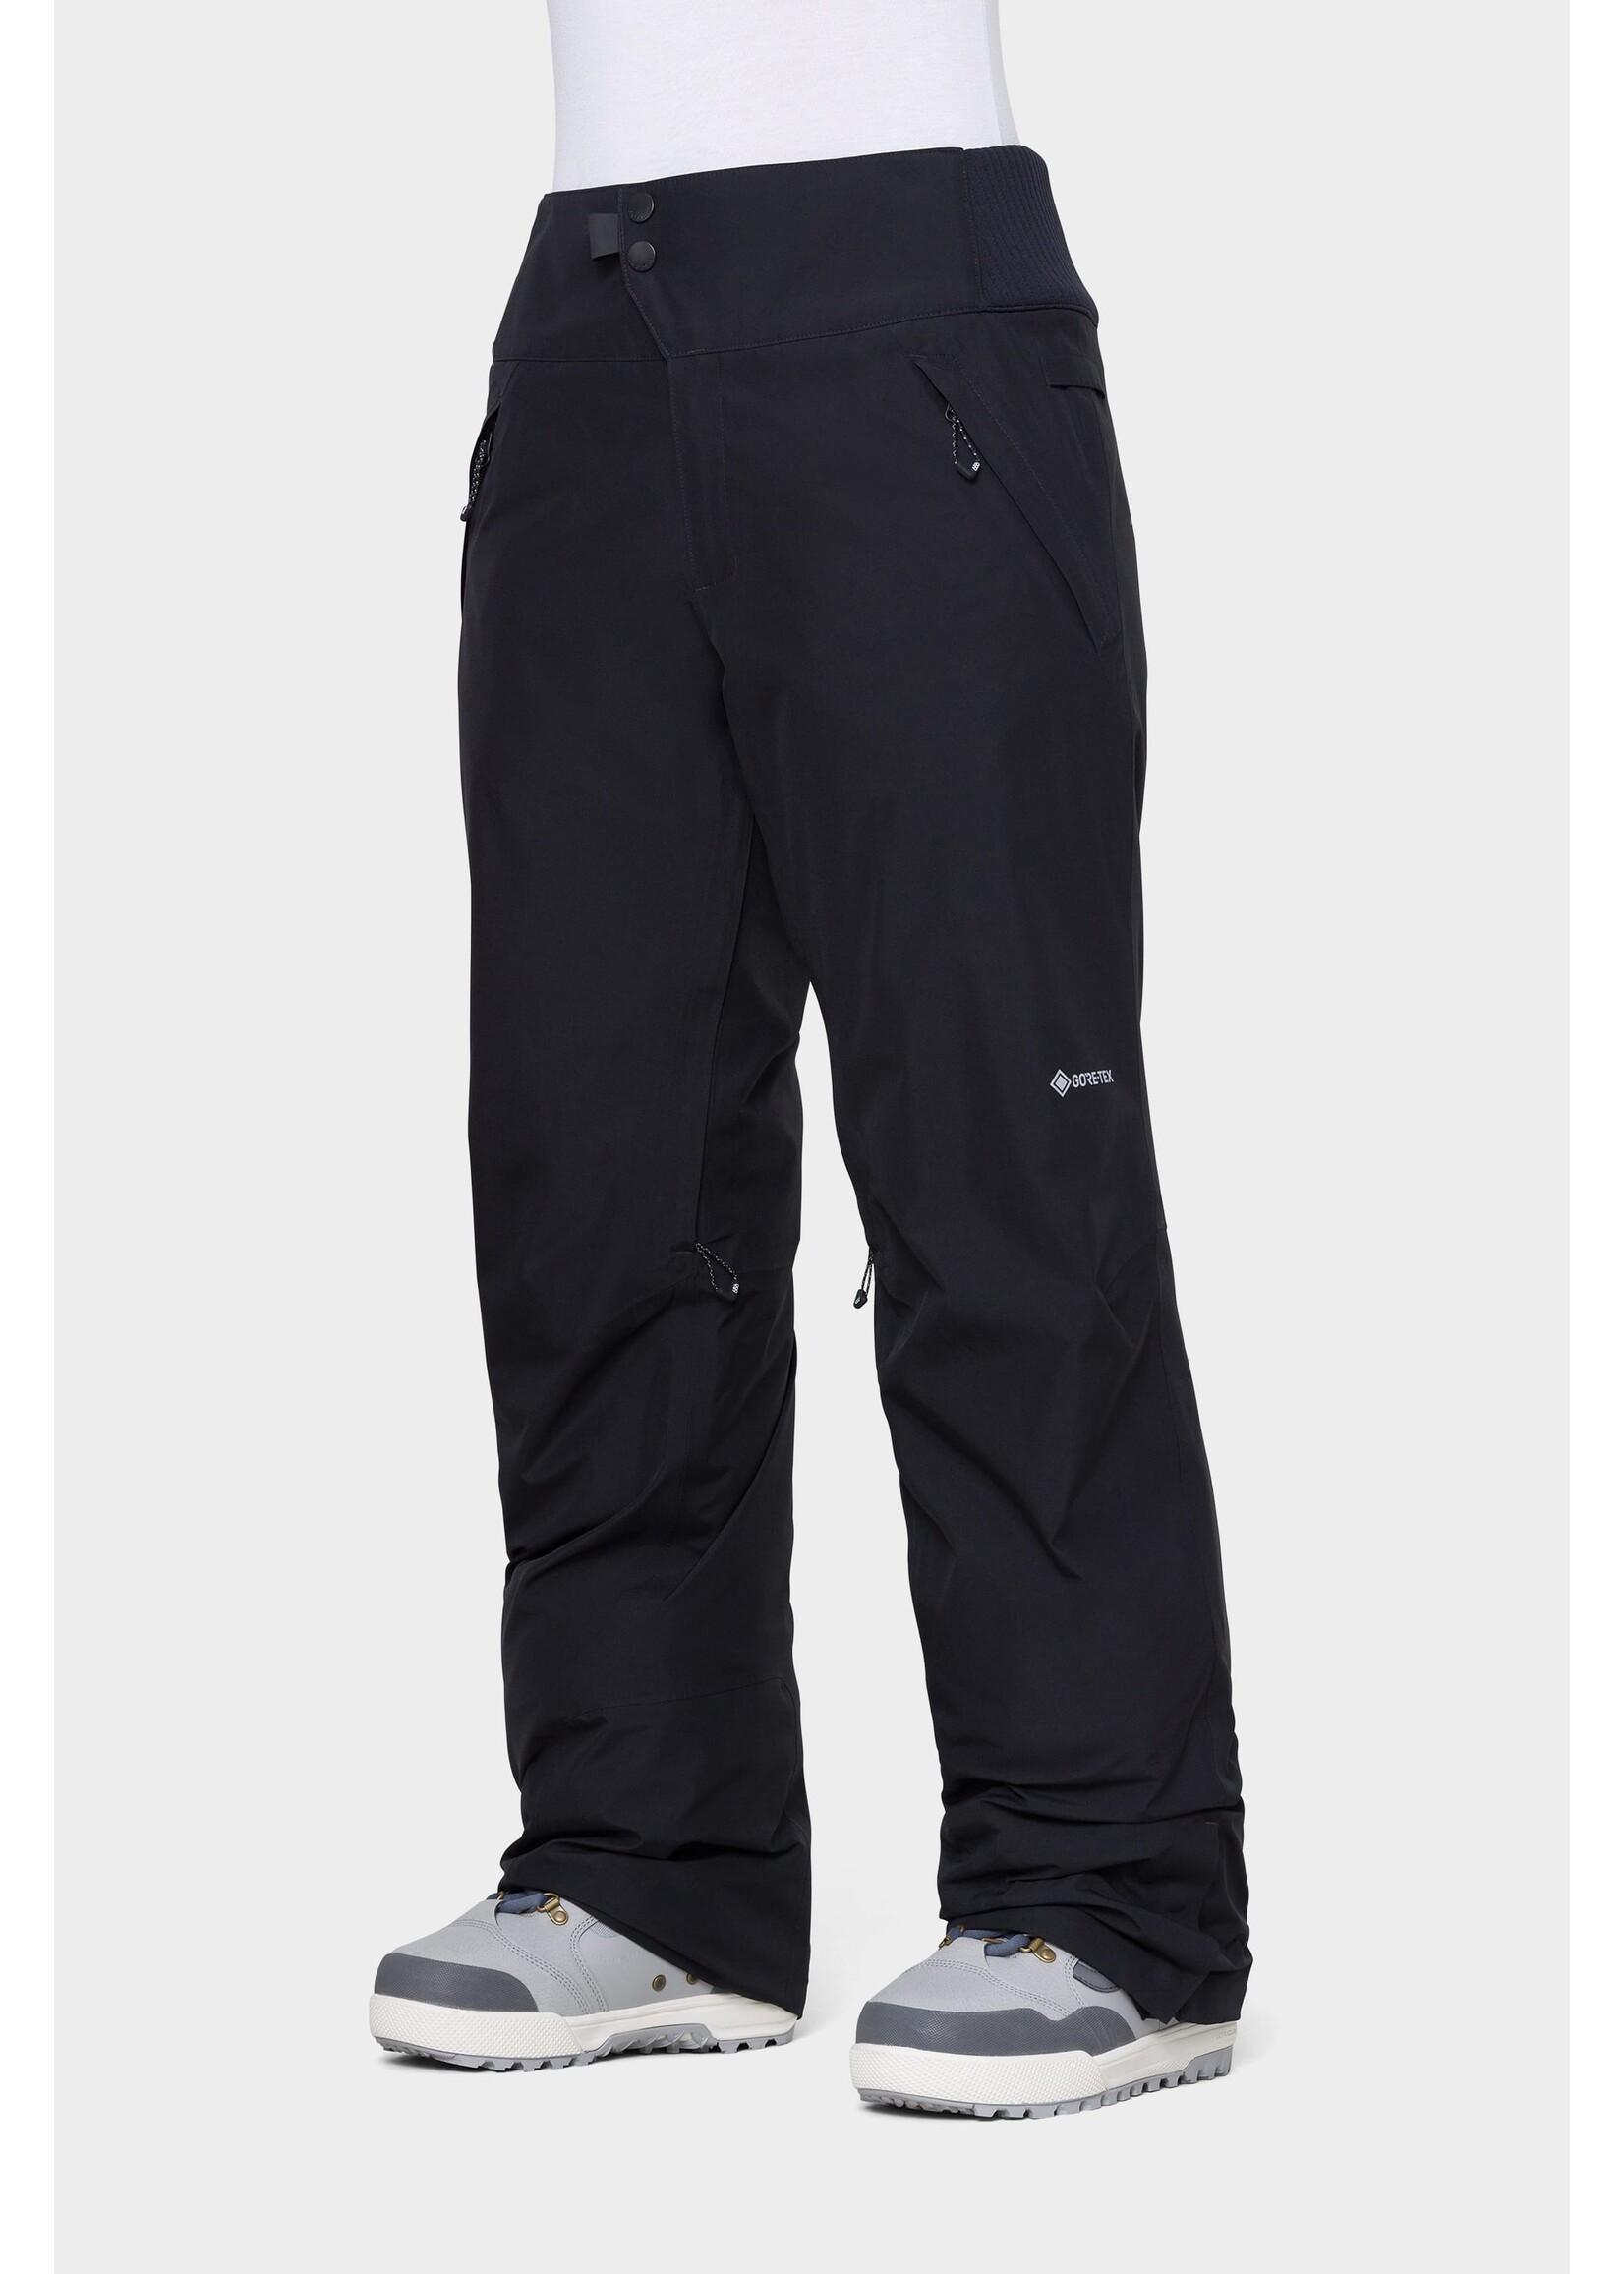 686 WMNS GORE-TEX WILLOW INSL PANT